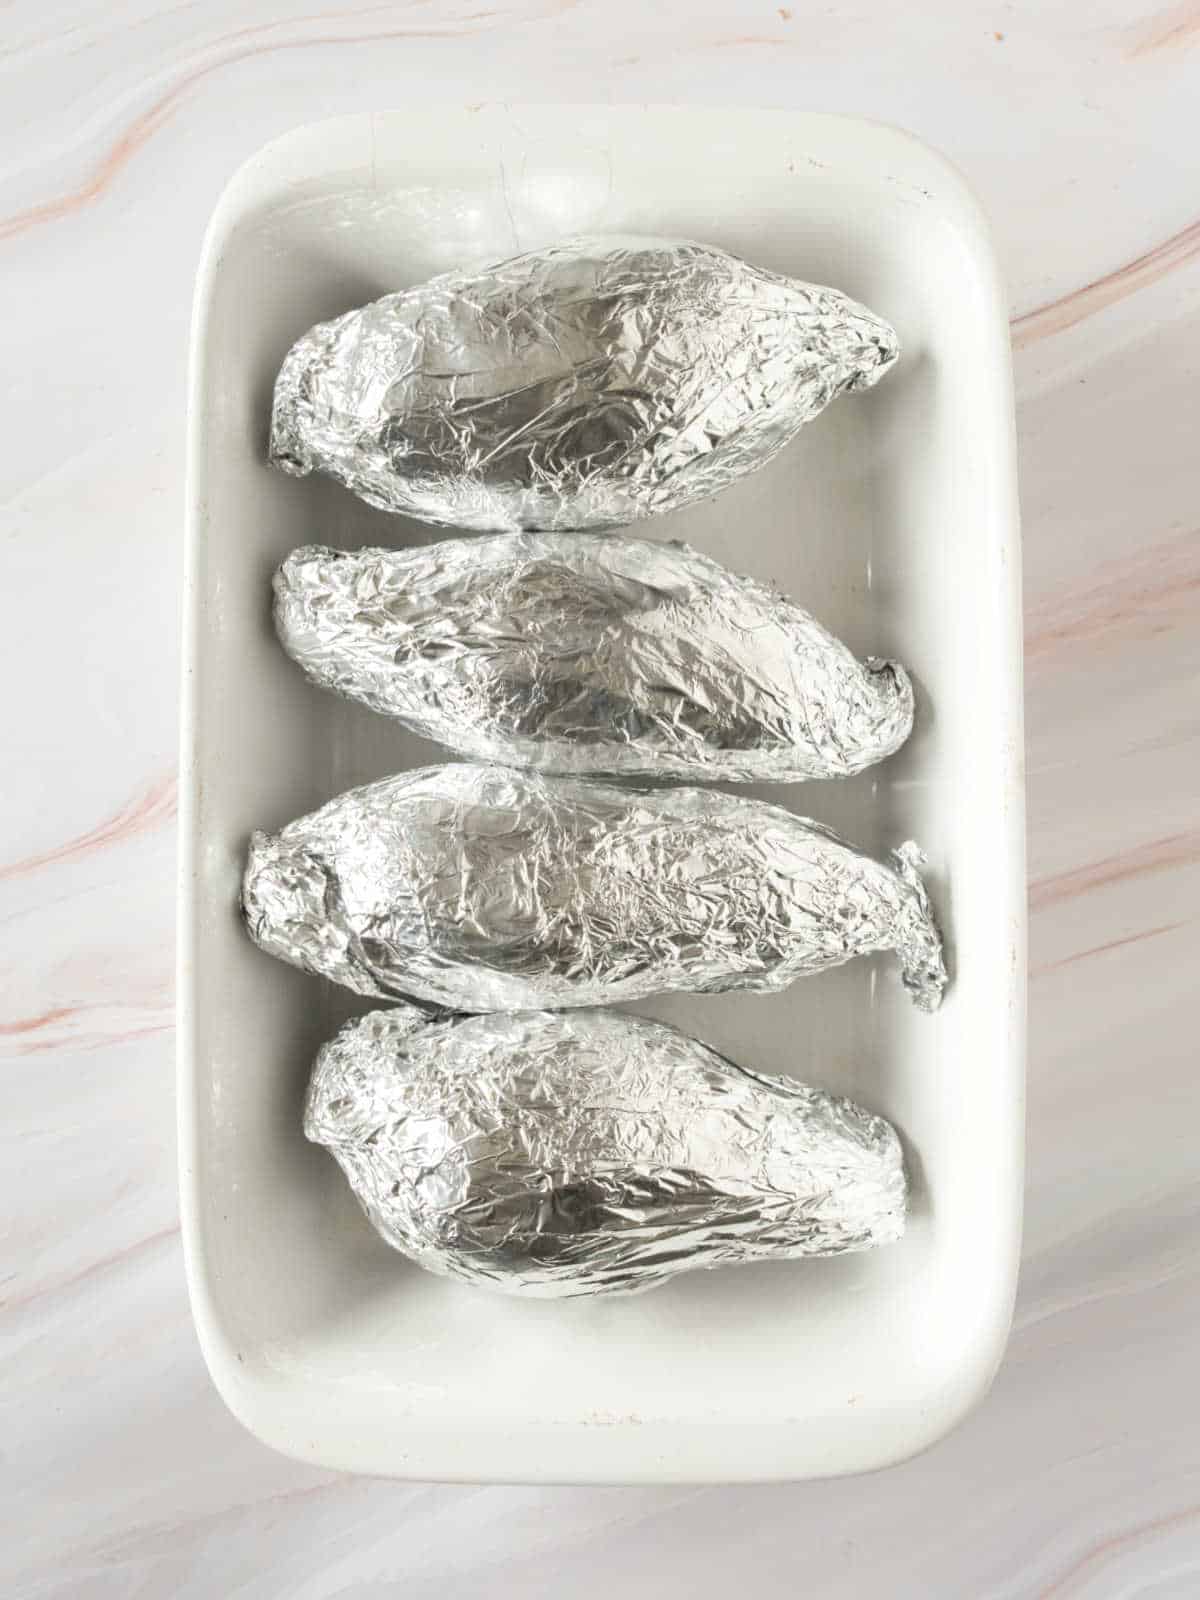 Foil wrapped sweet potatoes in a white rectangular dish on a white marbled surface.